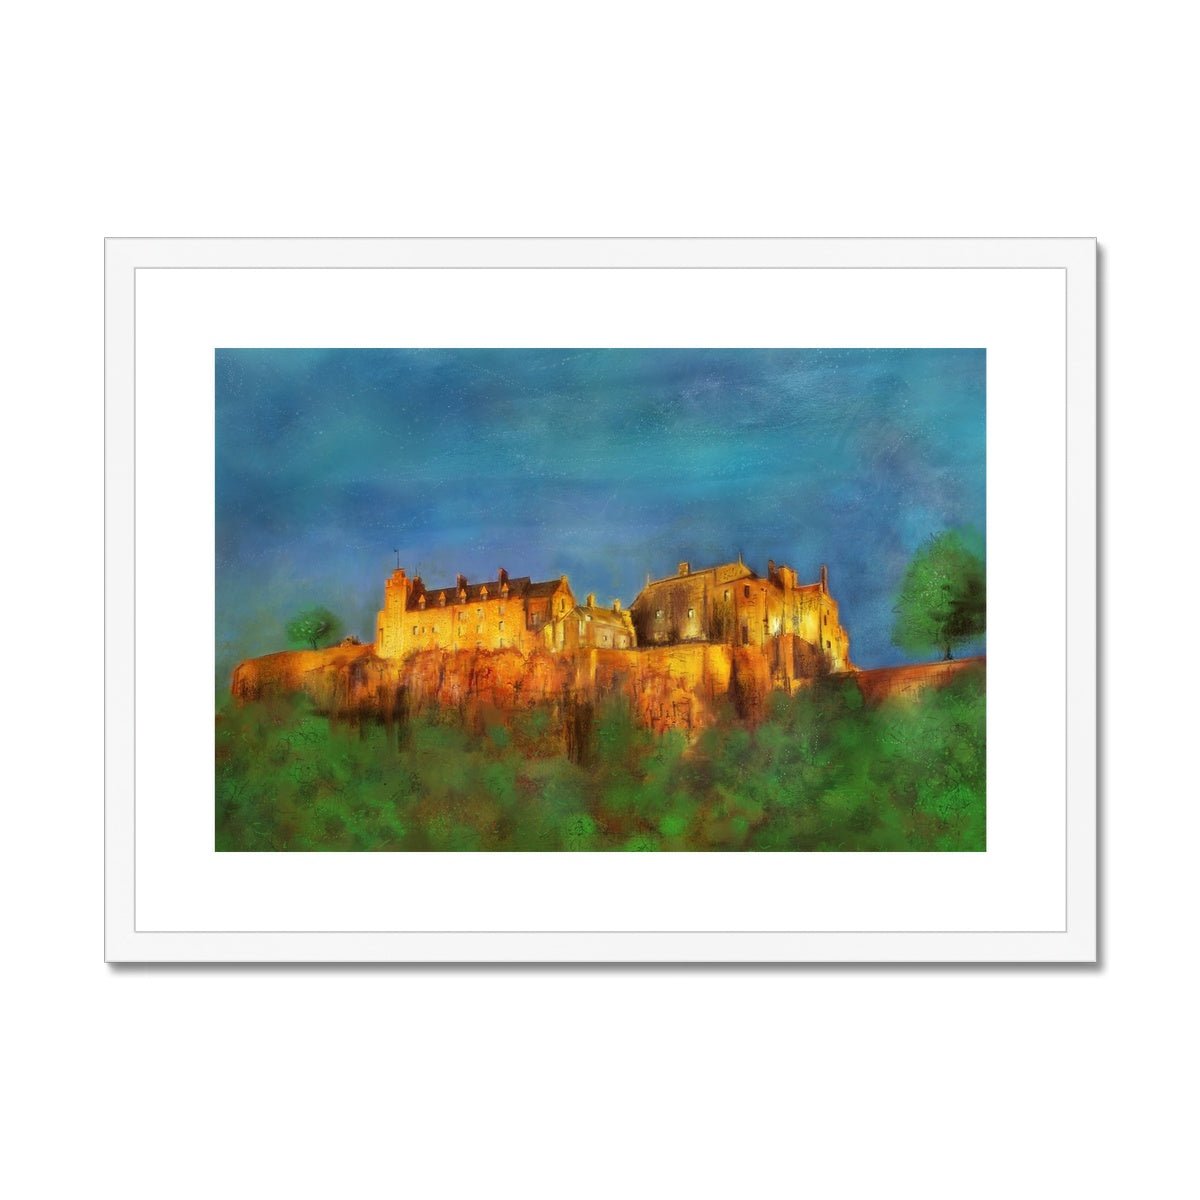 Stirling Castle Painting | Framed & Mounted Prints From Scotland-Framed & Mounted Prints-Historic & Iconic Scotland Art Gallery-A2 Landscape-White Frame-Paintings, Prints, Homeware, Art Gifts From Scotland By Scottish Artist Kevin Hunter